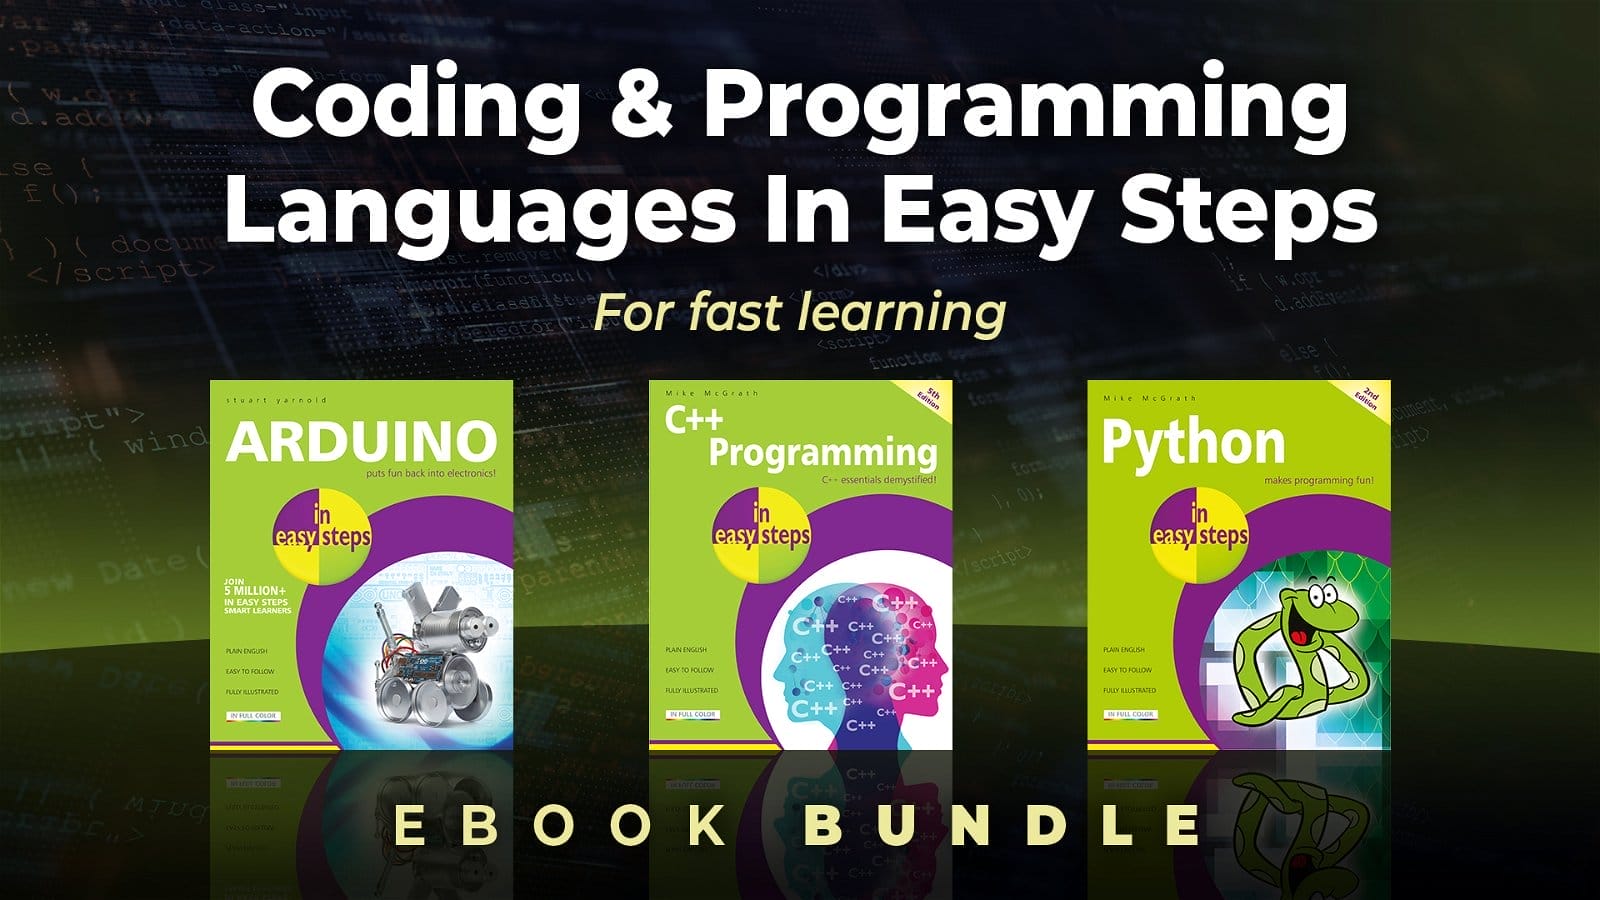 Coding & Programming Languages In Easy Steps Bundle